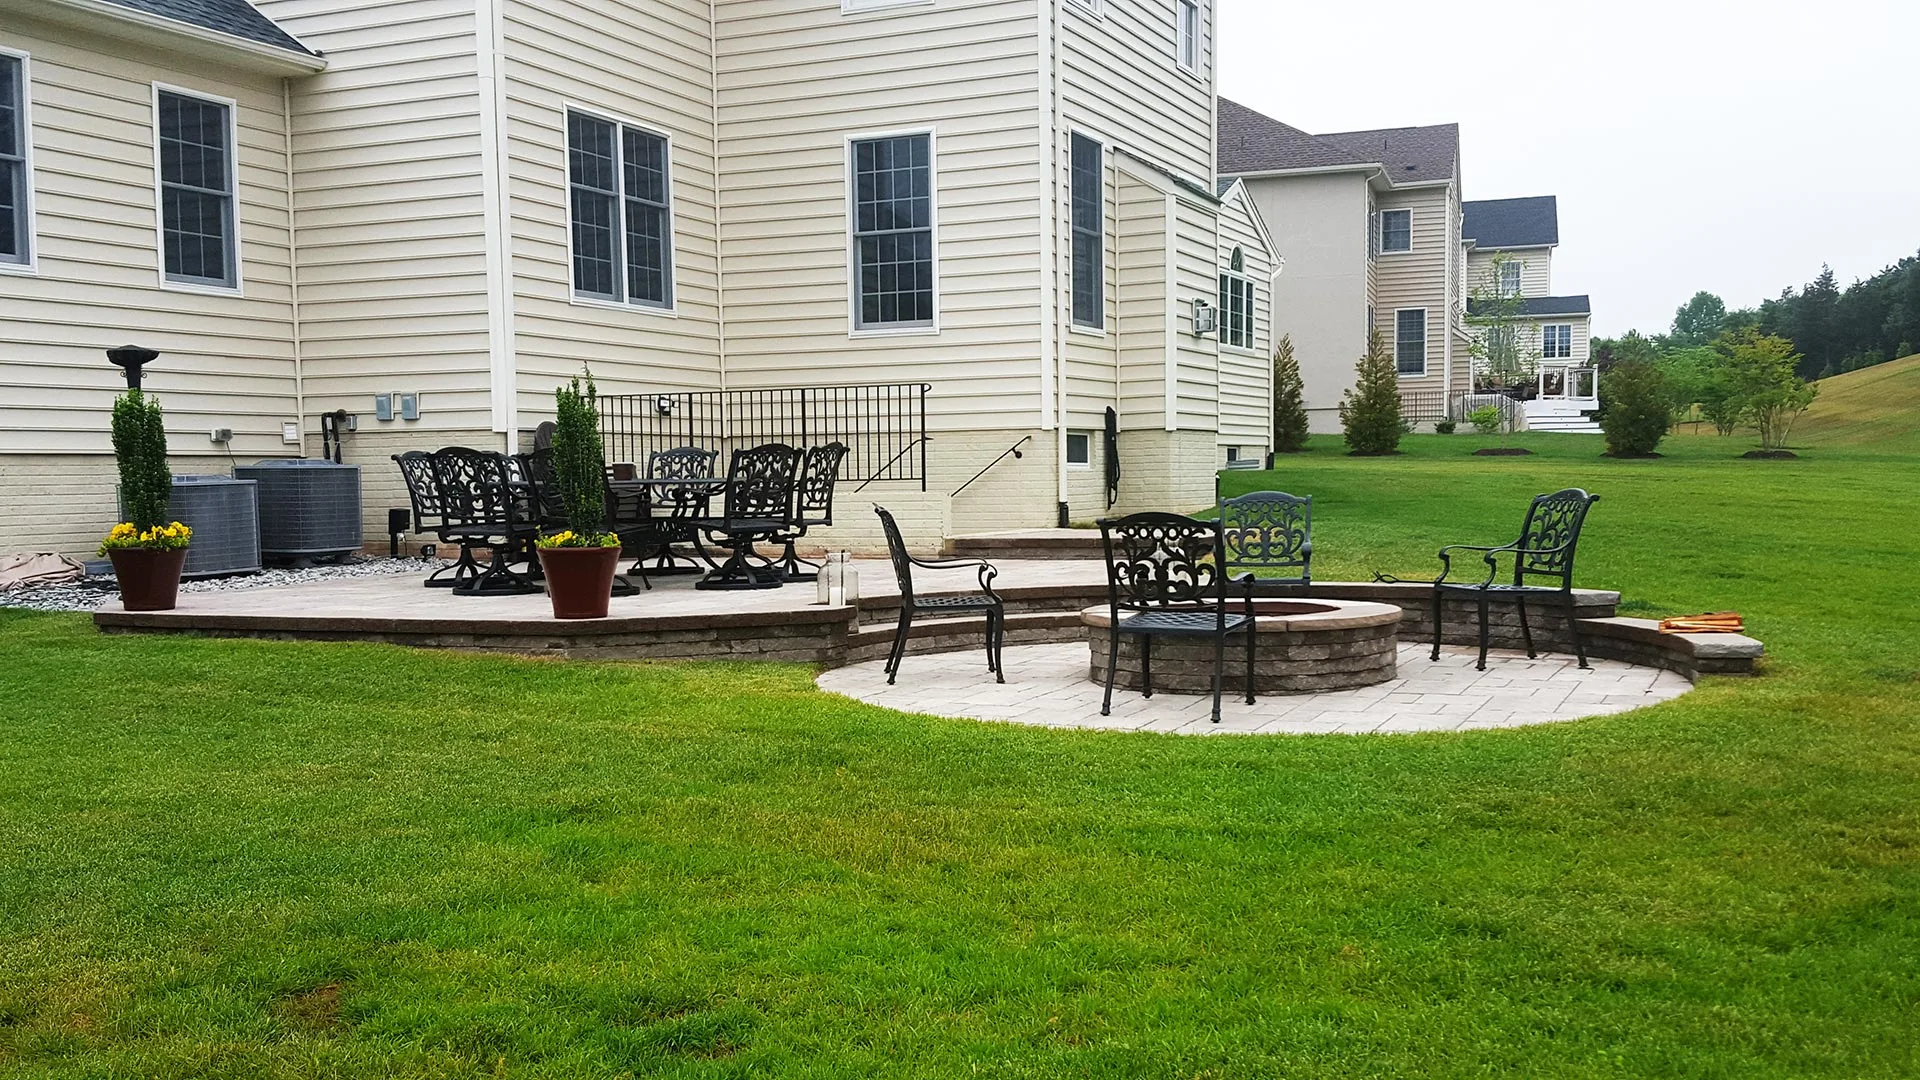 New Baltimore, VA home property with healthy lawn and custom patio and fire pit construction.